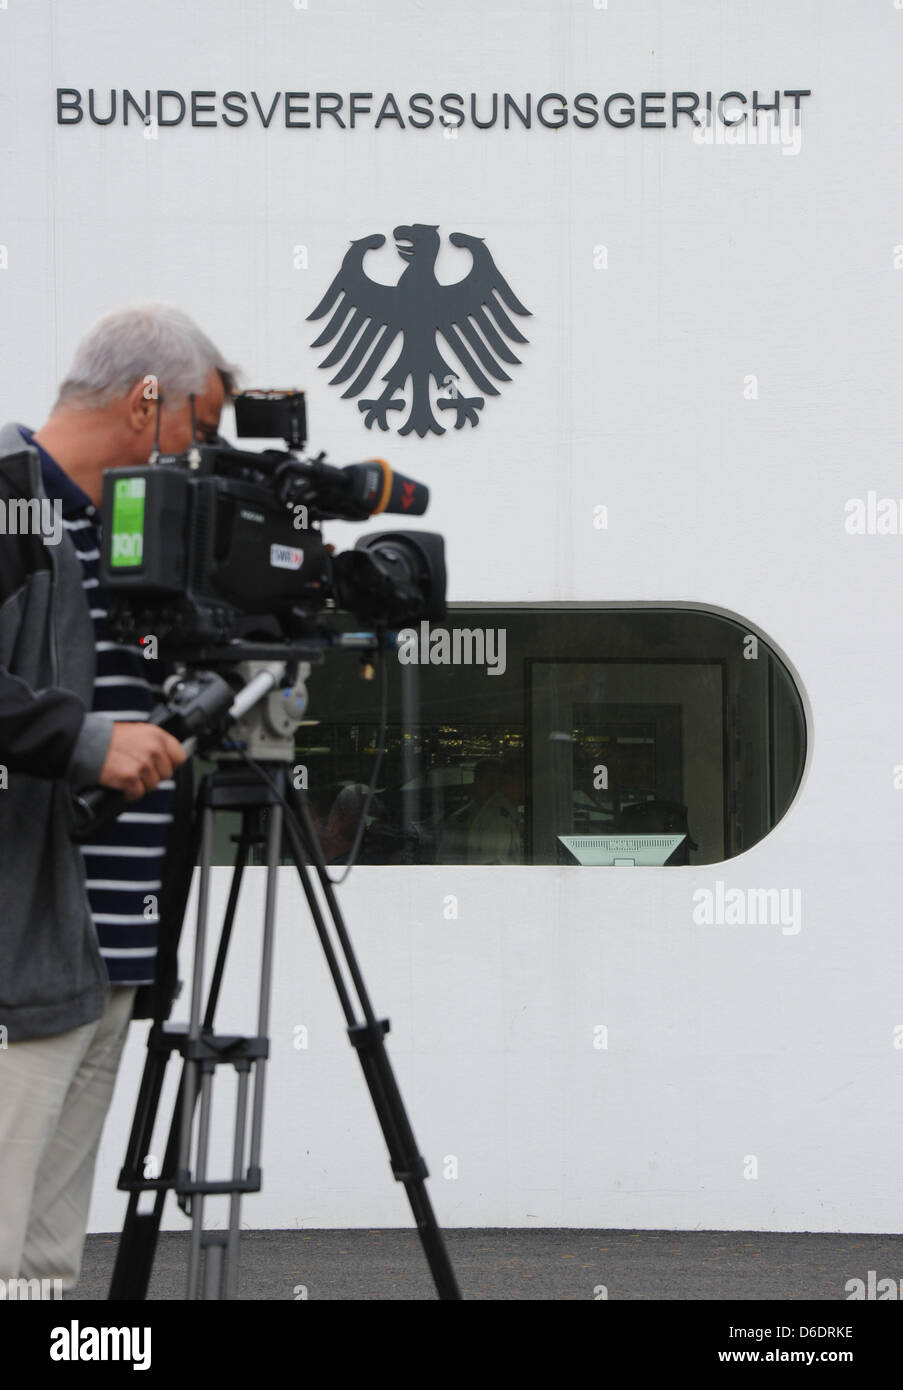 A cameraman films the Federal Constitutional Court of Germany (BVerfG) in Karlsruhe, Germany, 12 September 2012.  The BVerfG will on the same day announce its verdict on the permanent European Stability Mechanism and the European fiscal pact. Photo: ULI DECK Stock Photo